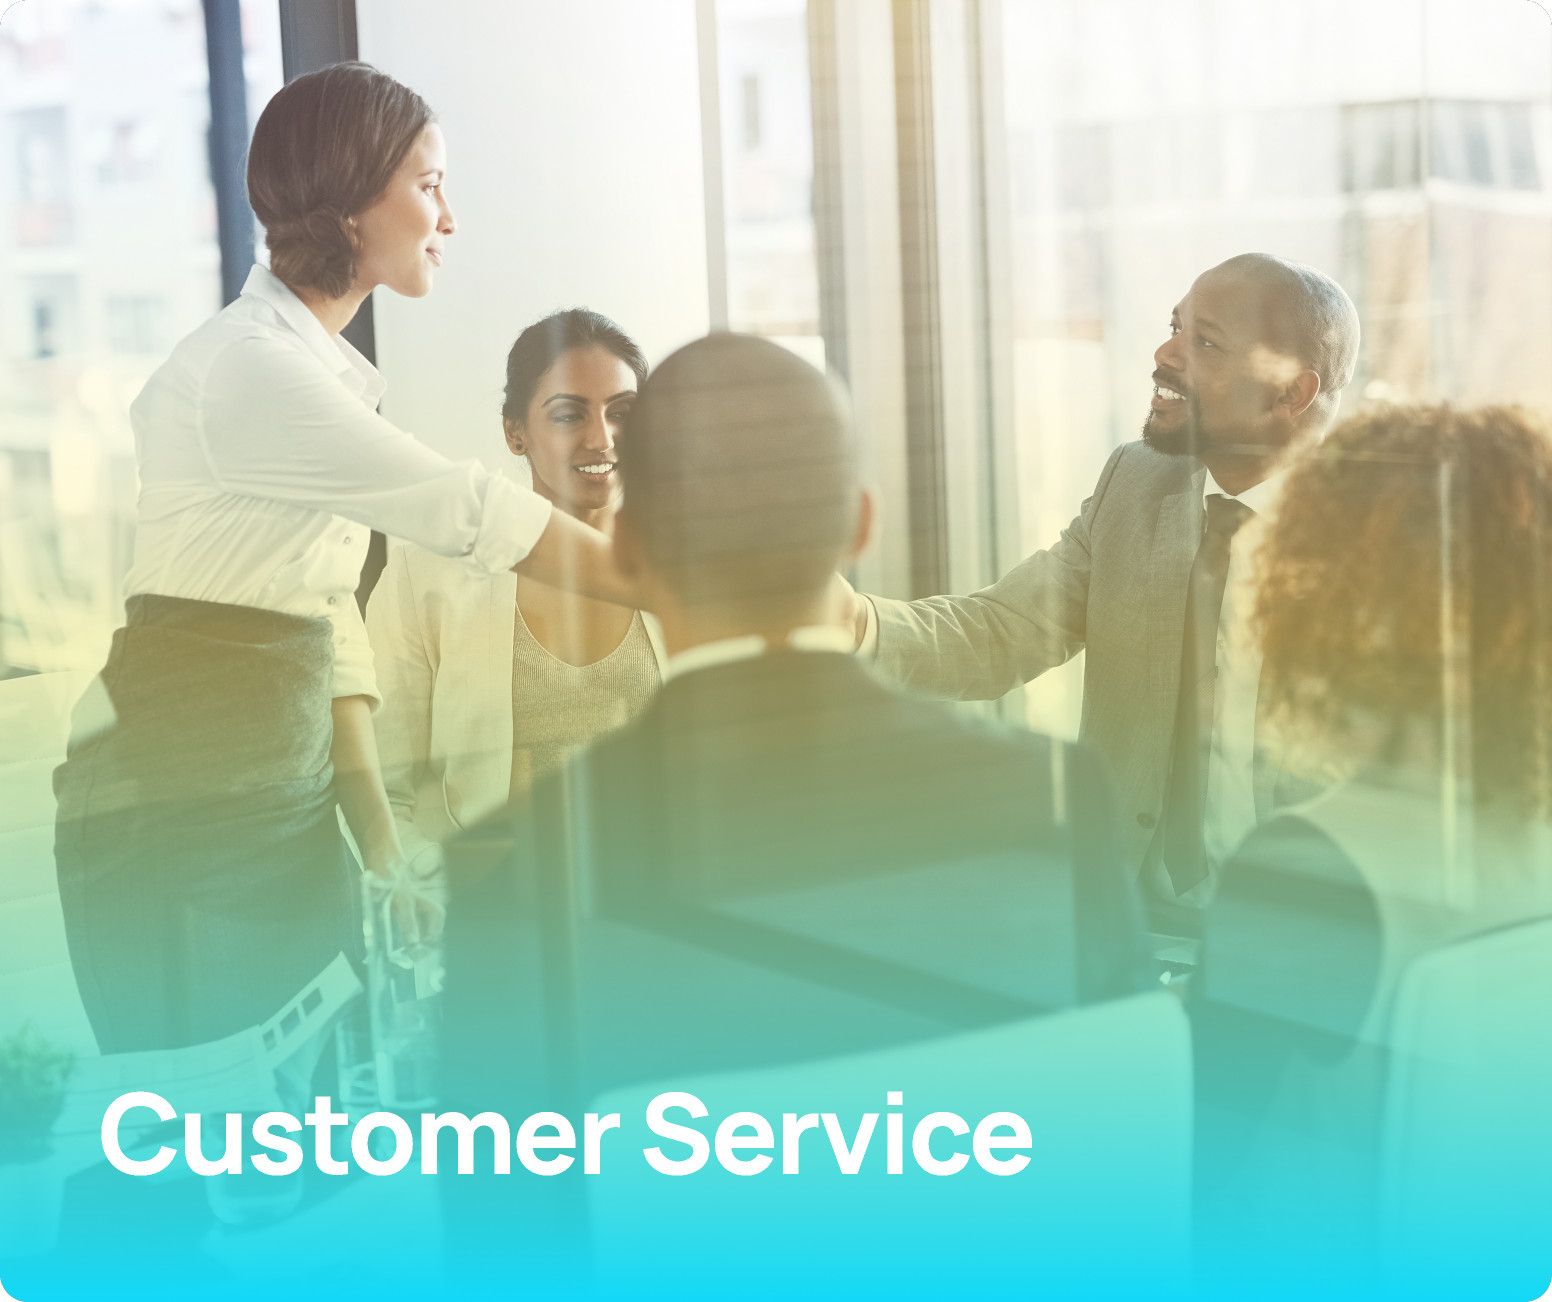 Scalable for Customer Service